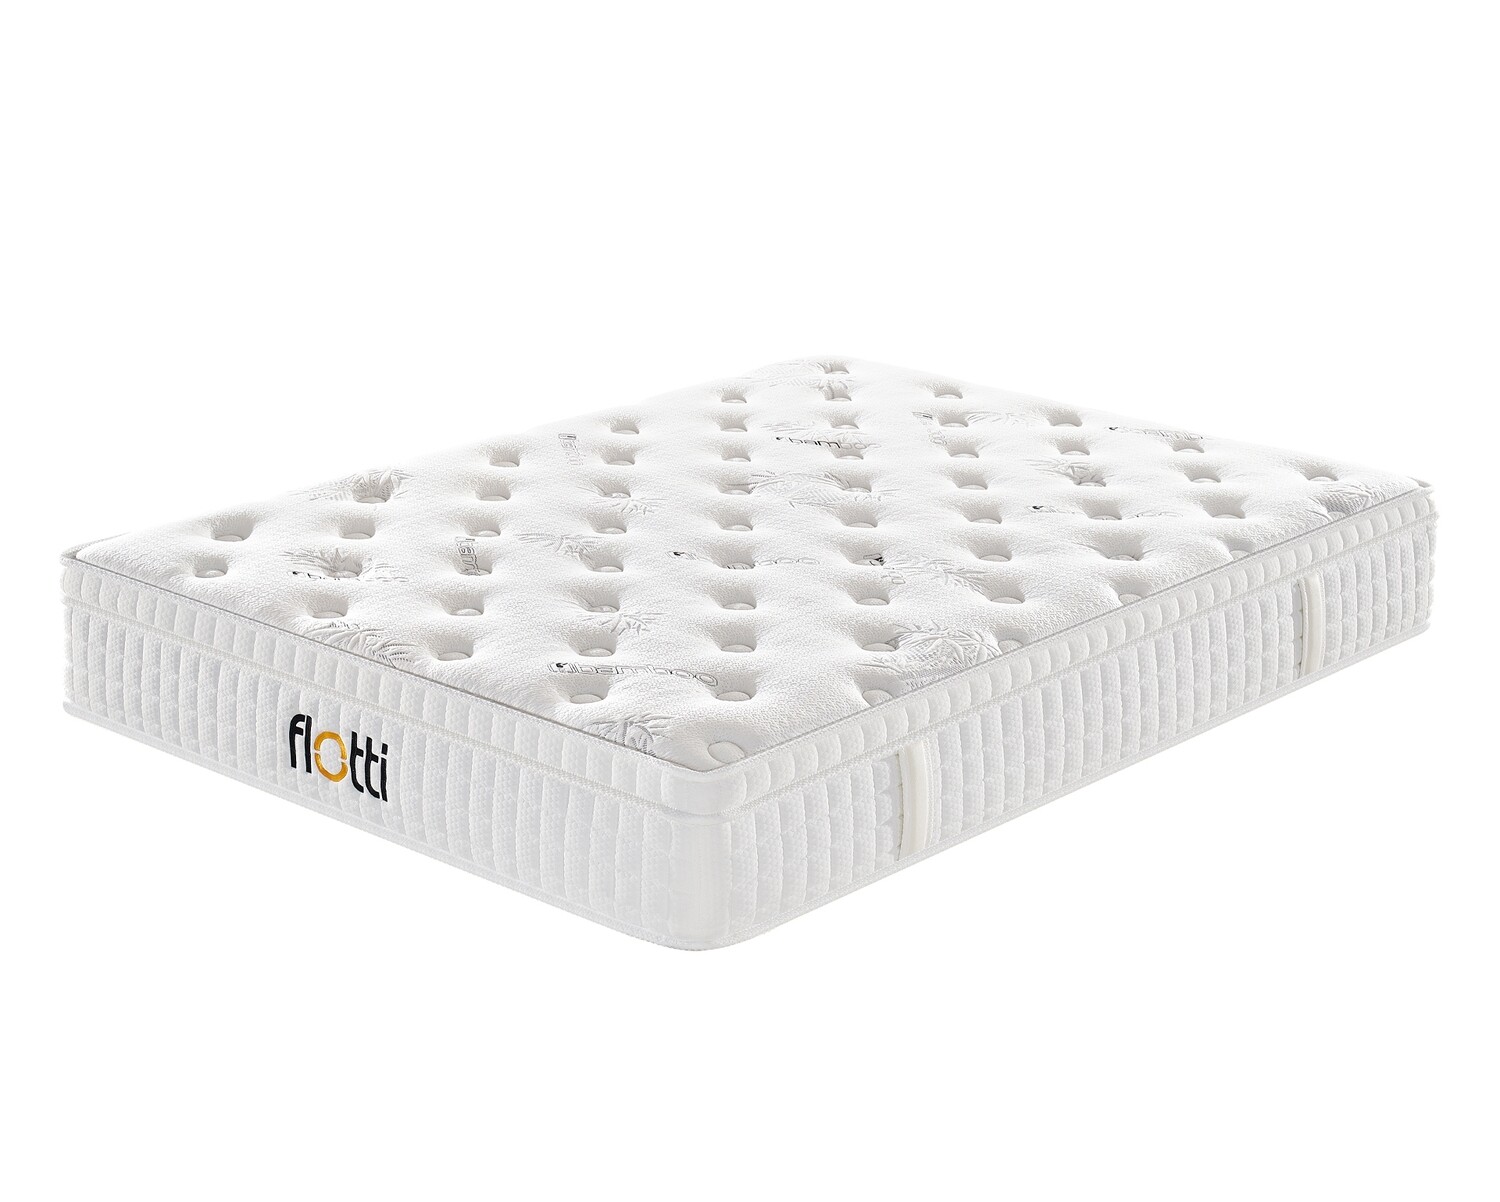 Flotti Orthopedic Bamboo Wave Hybrid Mattress with Cool Gel Infused Memory Foam (Single, Double, Queen & King)